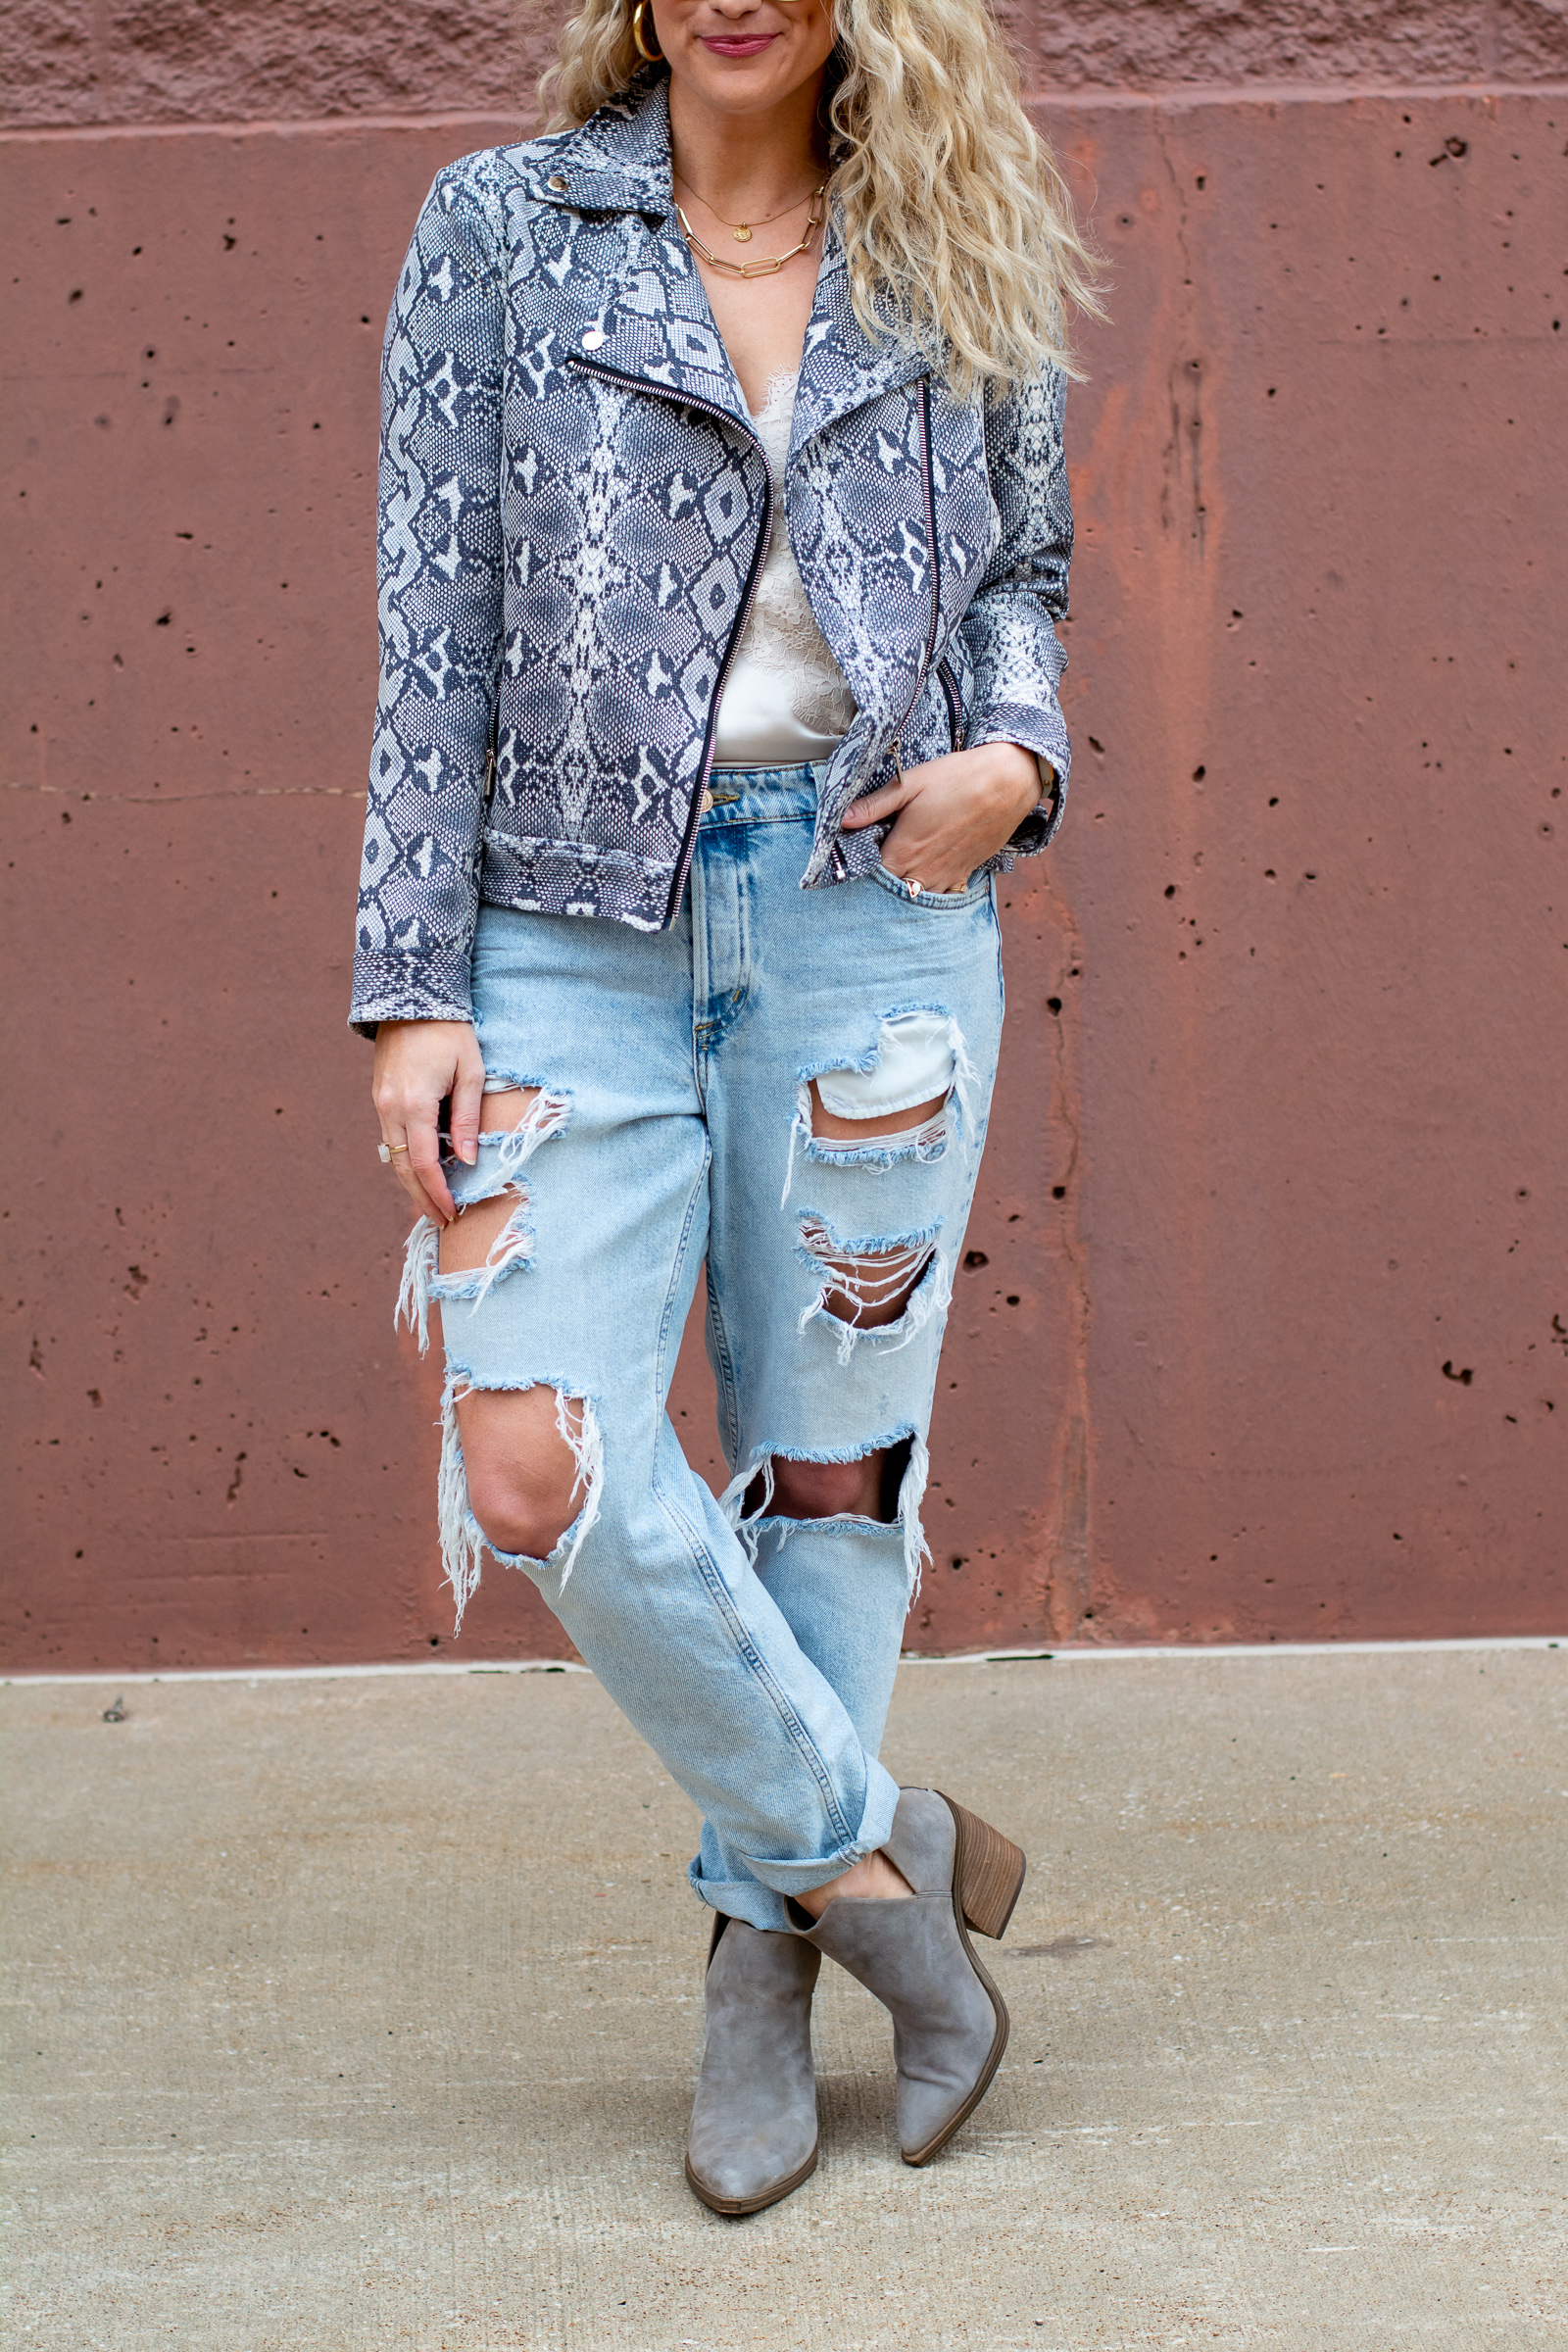 Fall Outfit: Lightweight Printed Jacket + Destroyed Boyfriend Jeans. | LSR